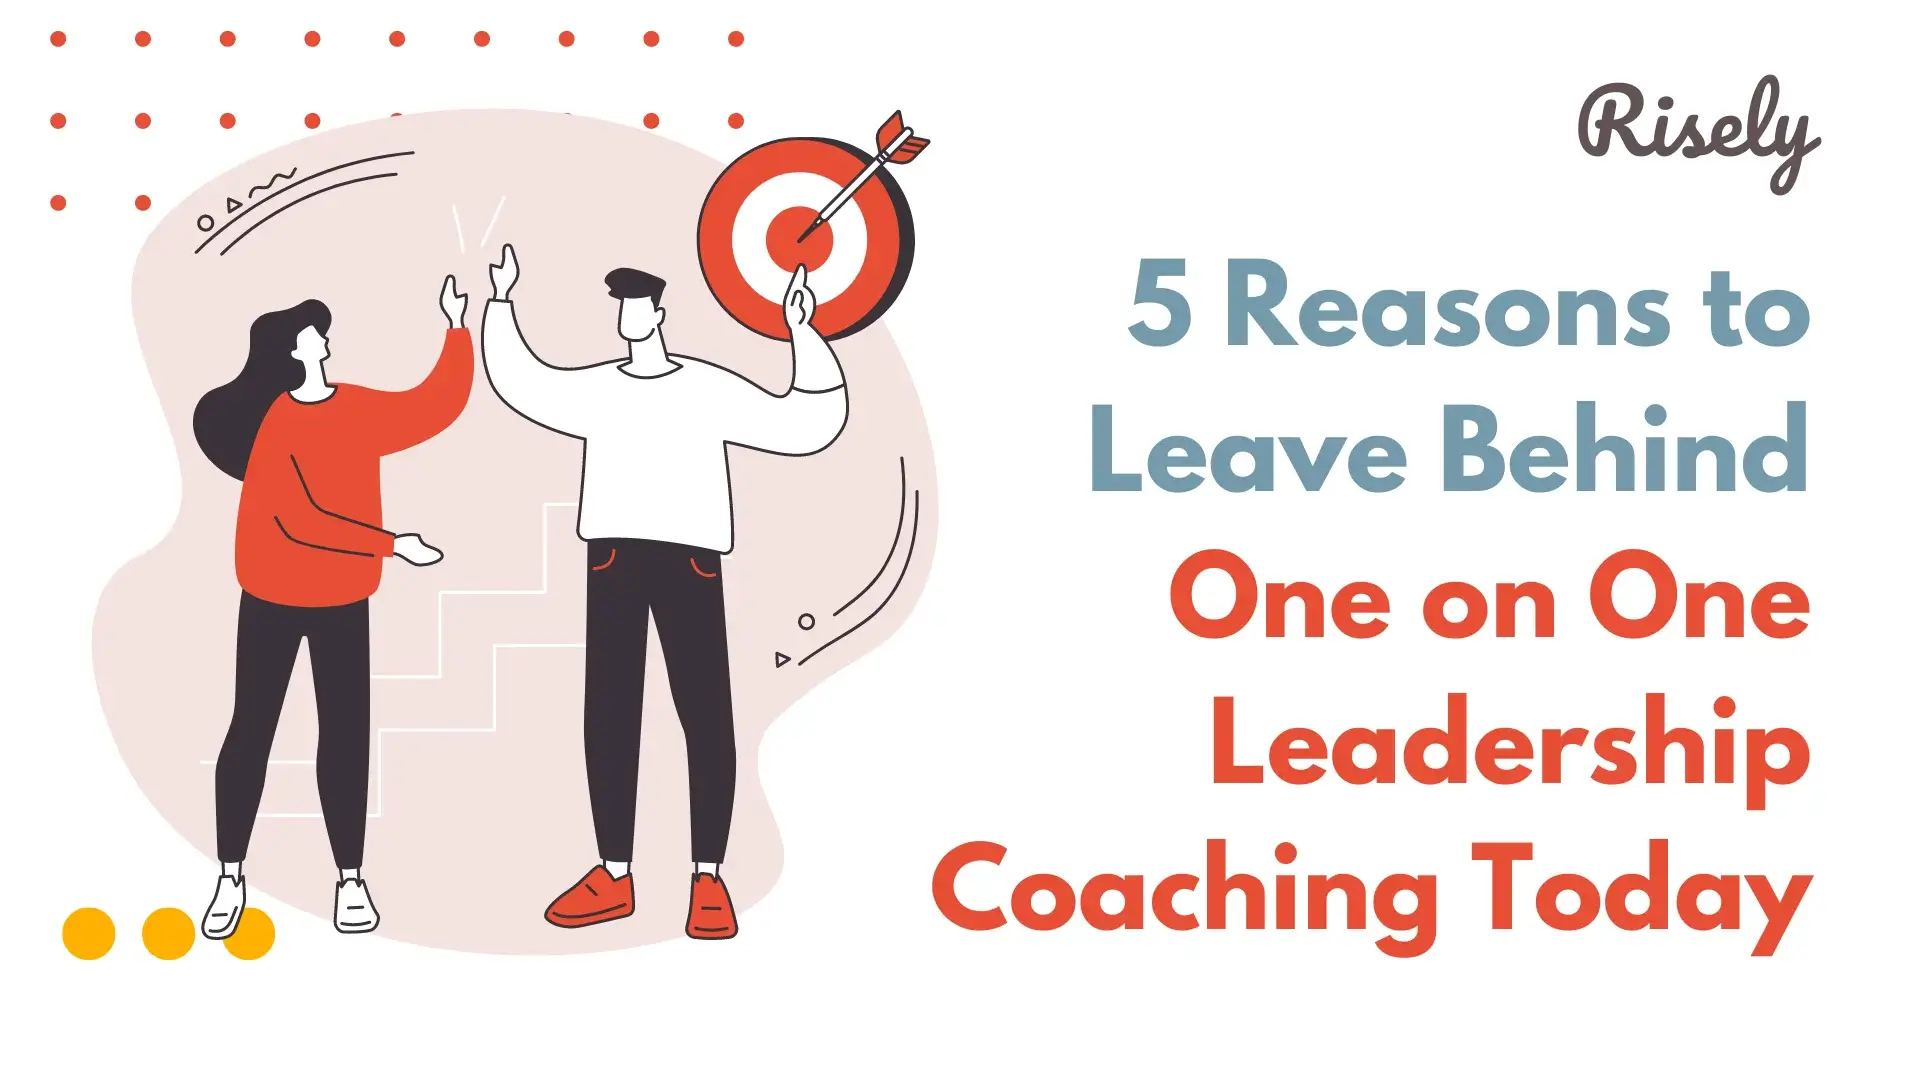 5 Reasons to Leave Behind One on One Leadership Coaching Today